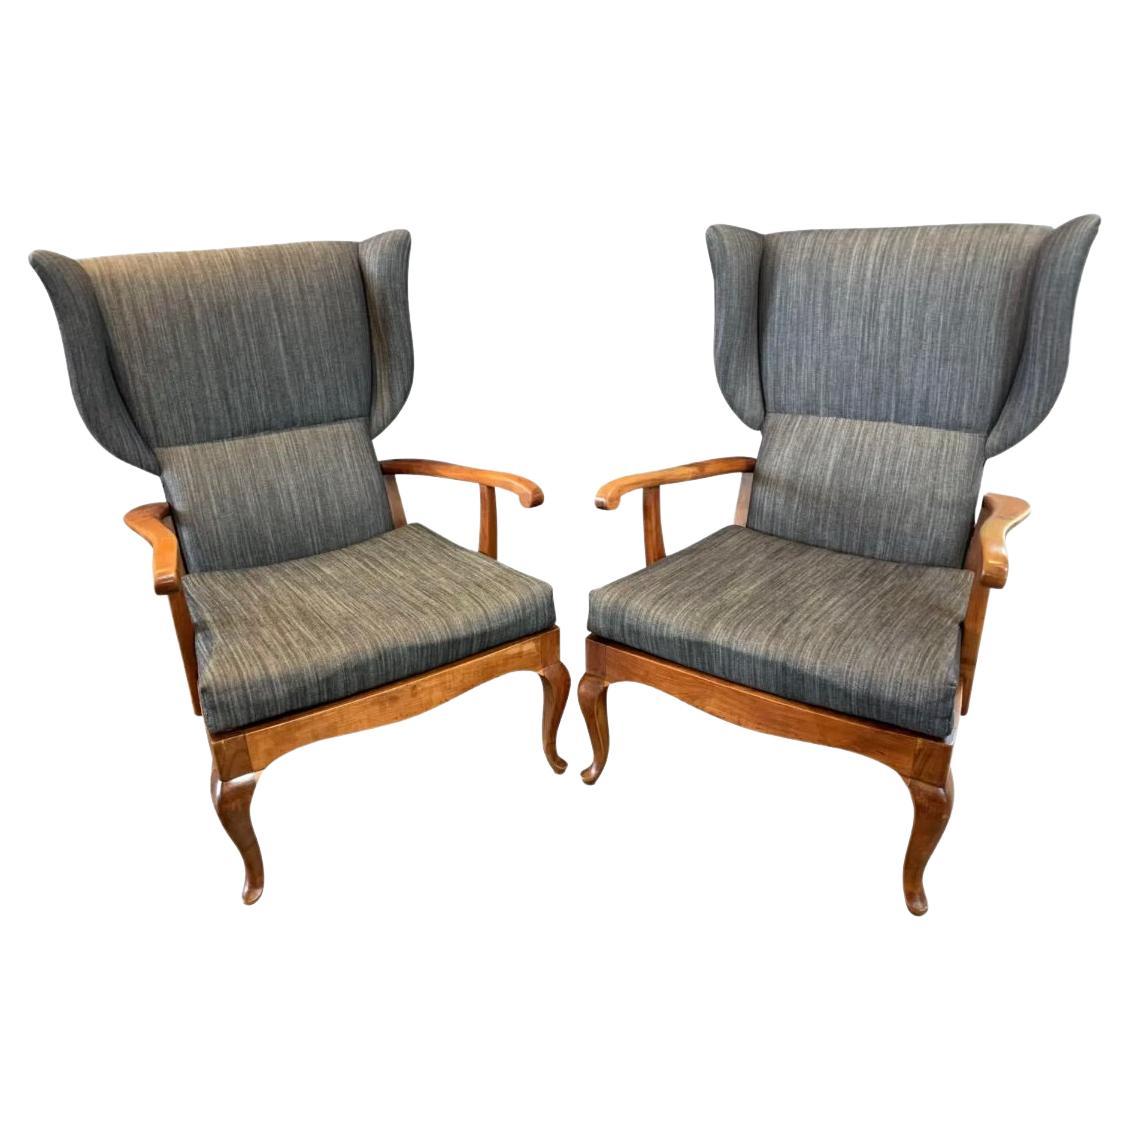 A Pair of Italian Walnut Open Arm Wing Chairs For Sale